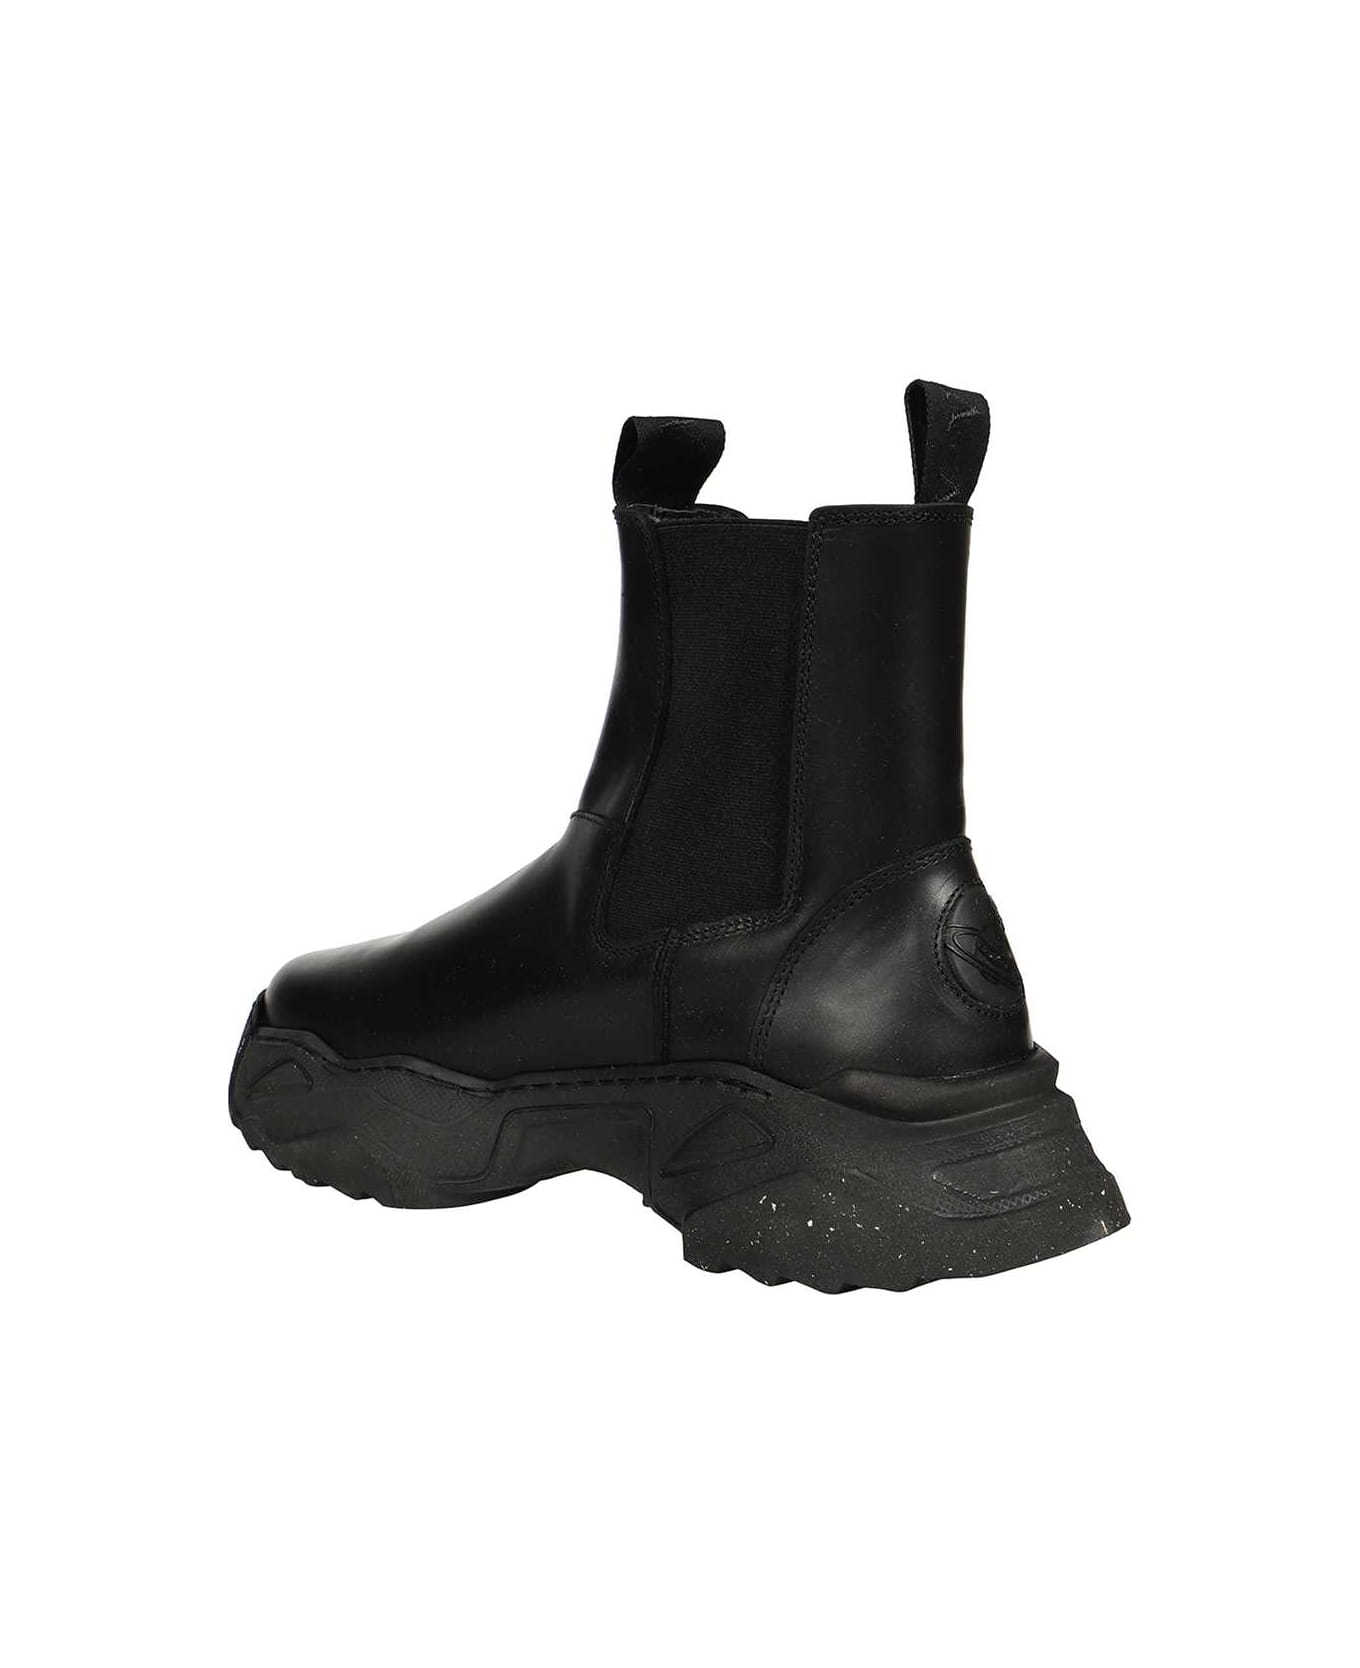 Vivienne Westwood Leather Chelsea Boots - black ブーツ